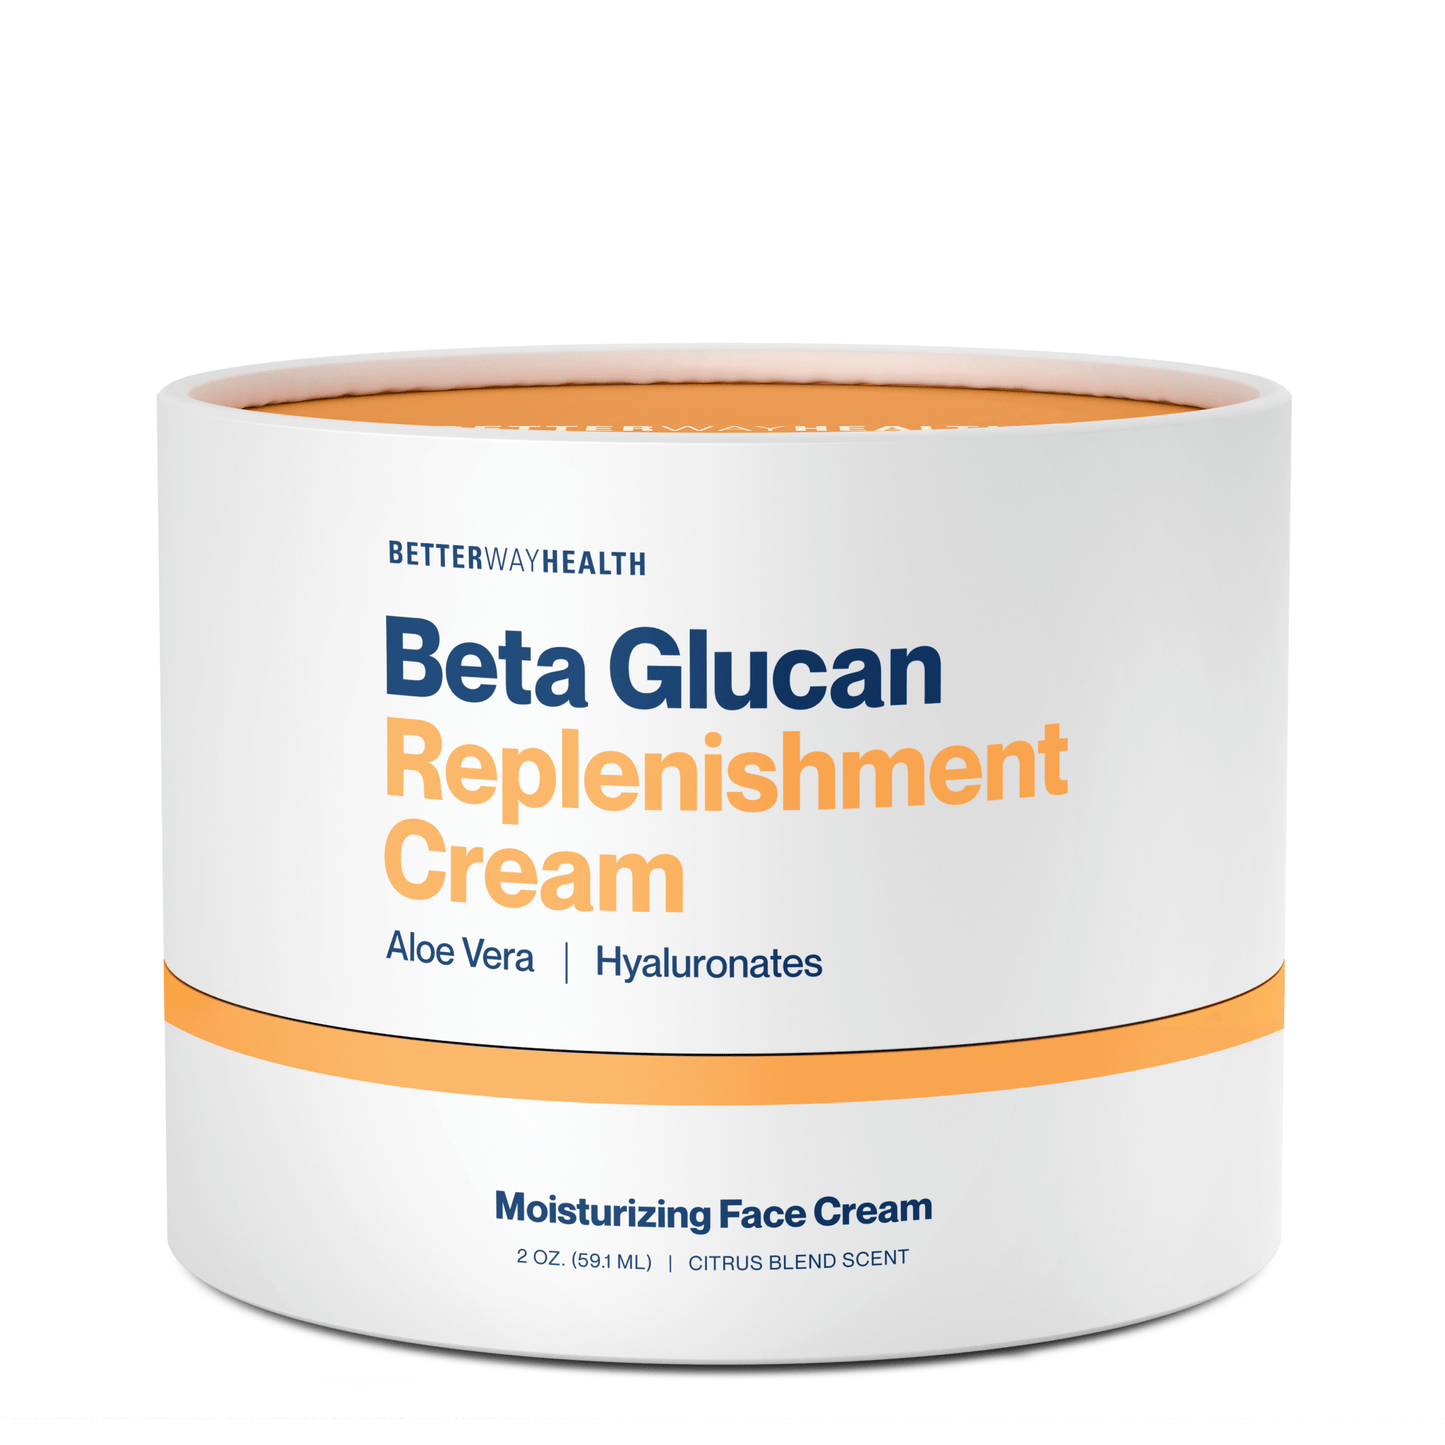 Beautiful and safe packaging buy beta glucan cream online now